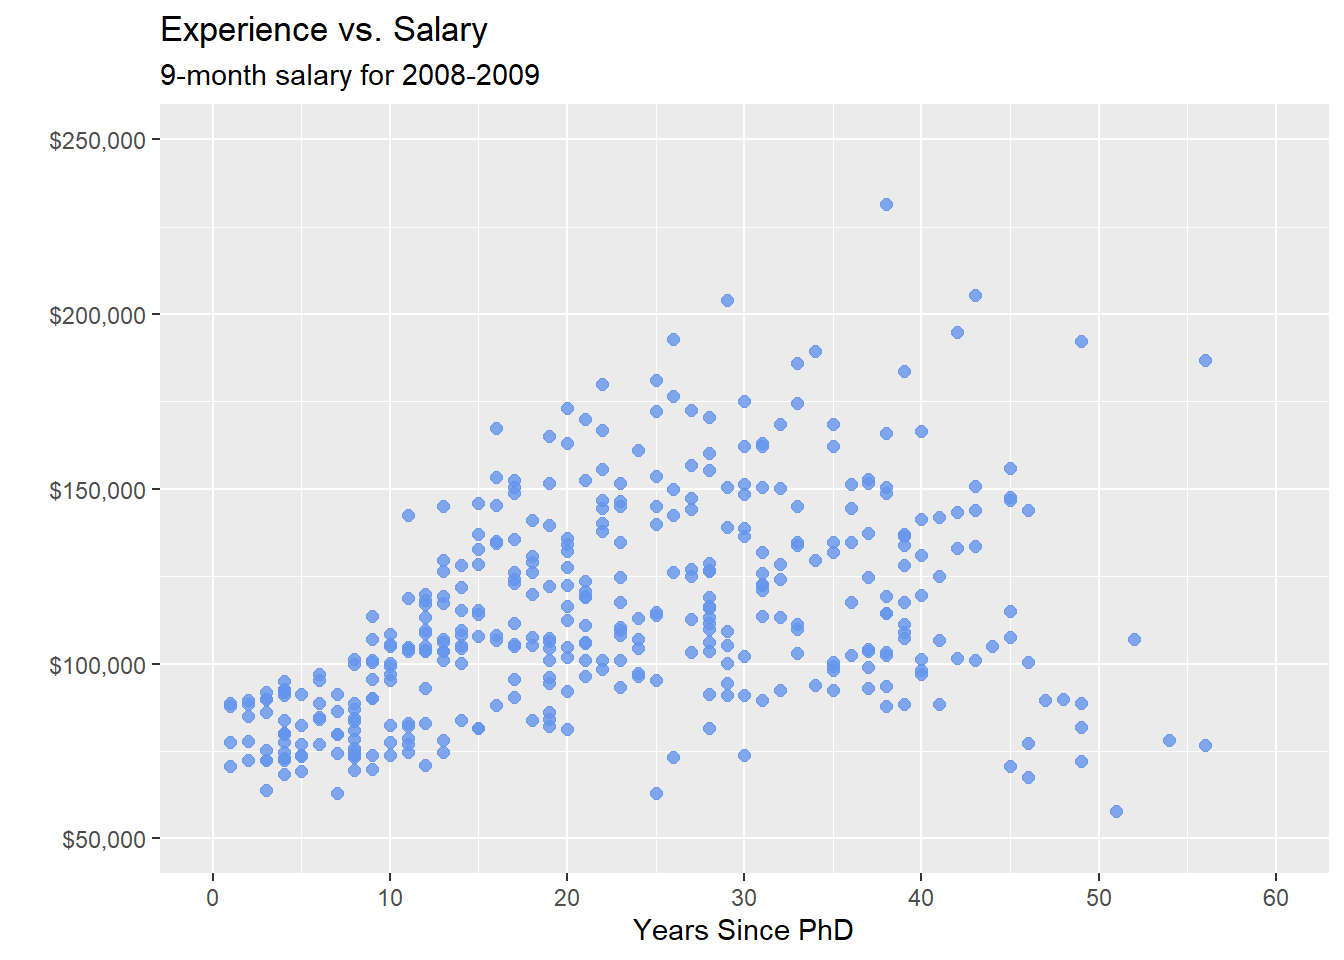 Scatterplot with color, transparency, and axis scaling